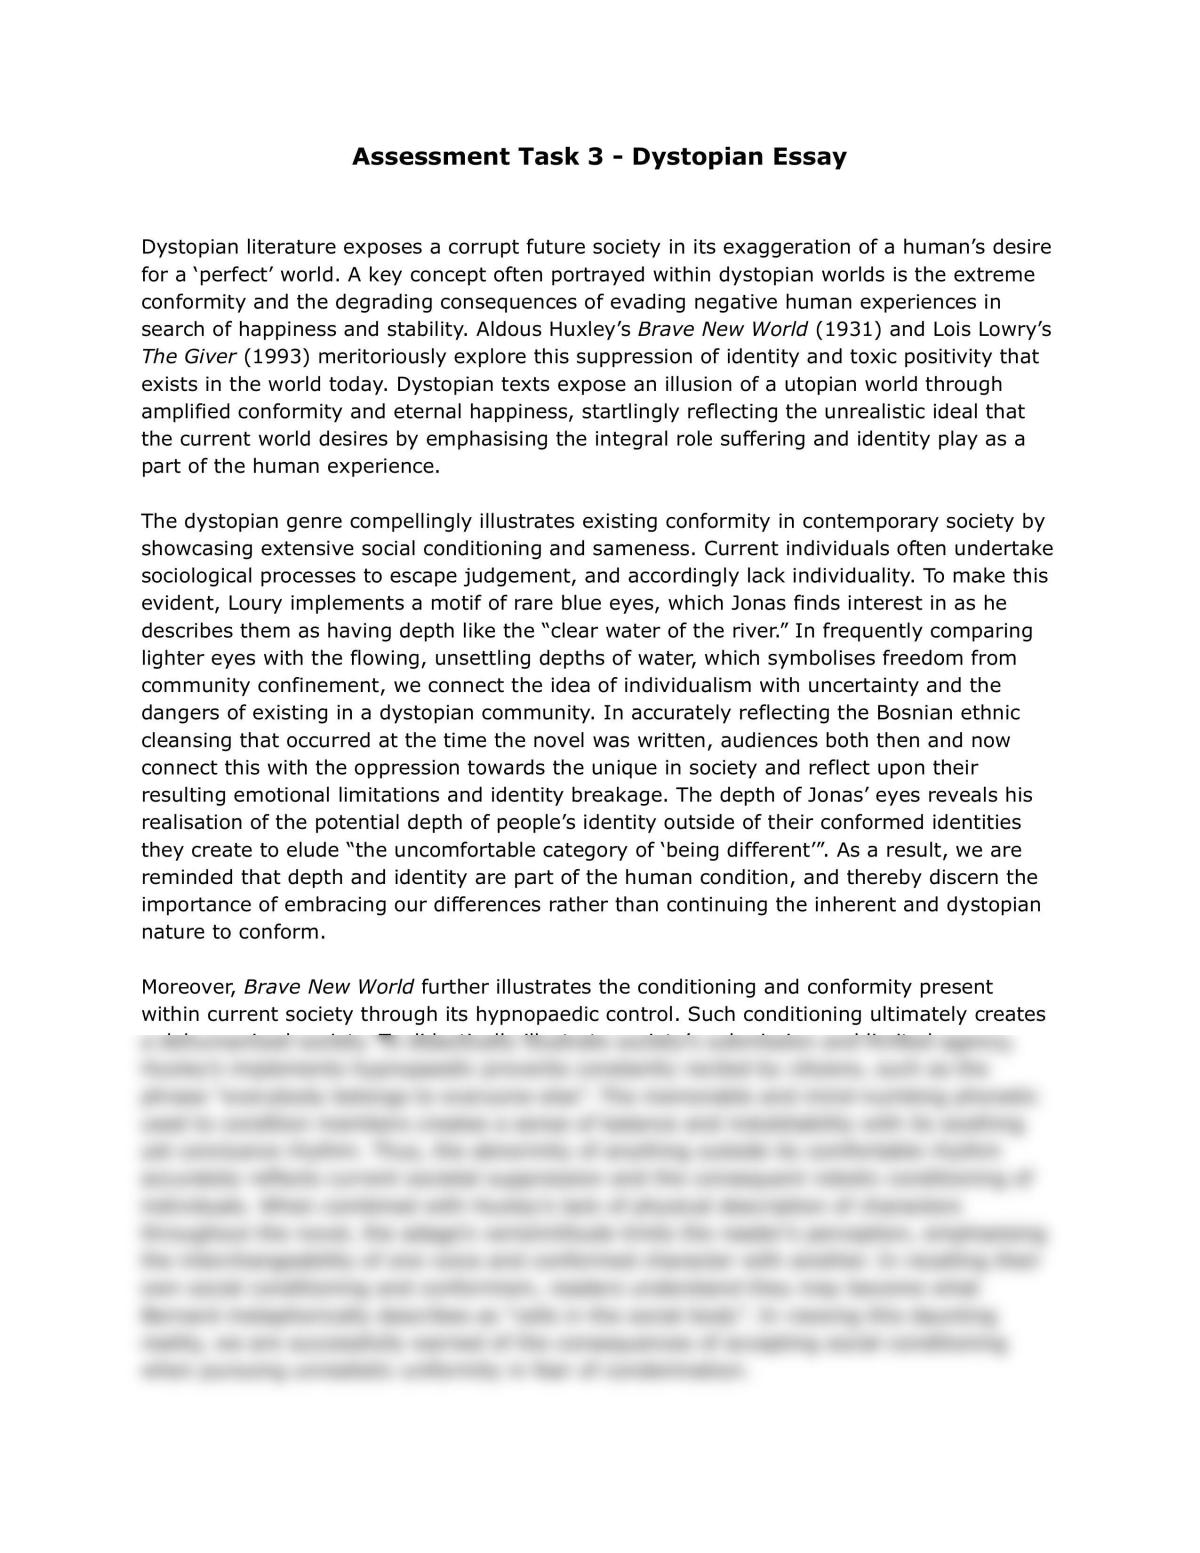 Brave New World and the Giver Essay - Page 1